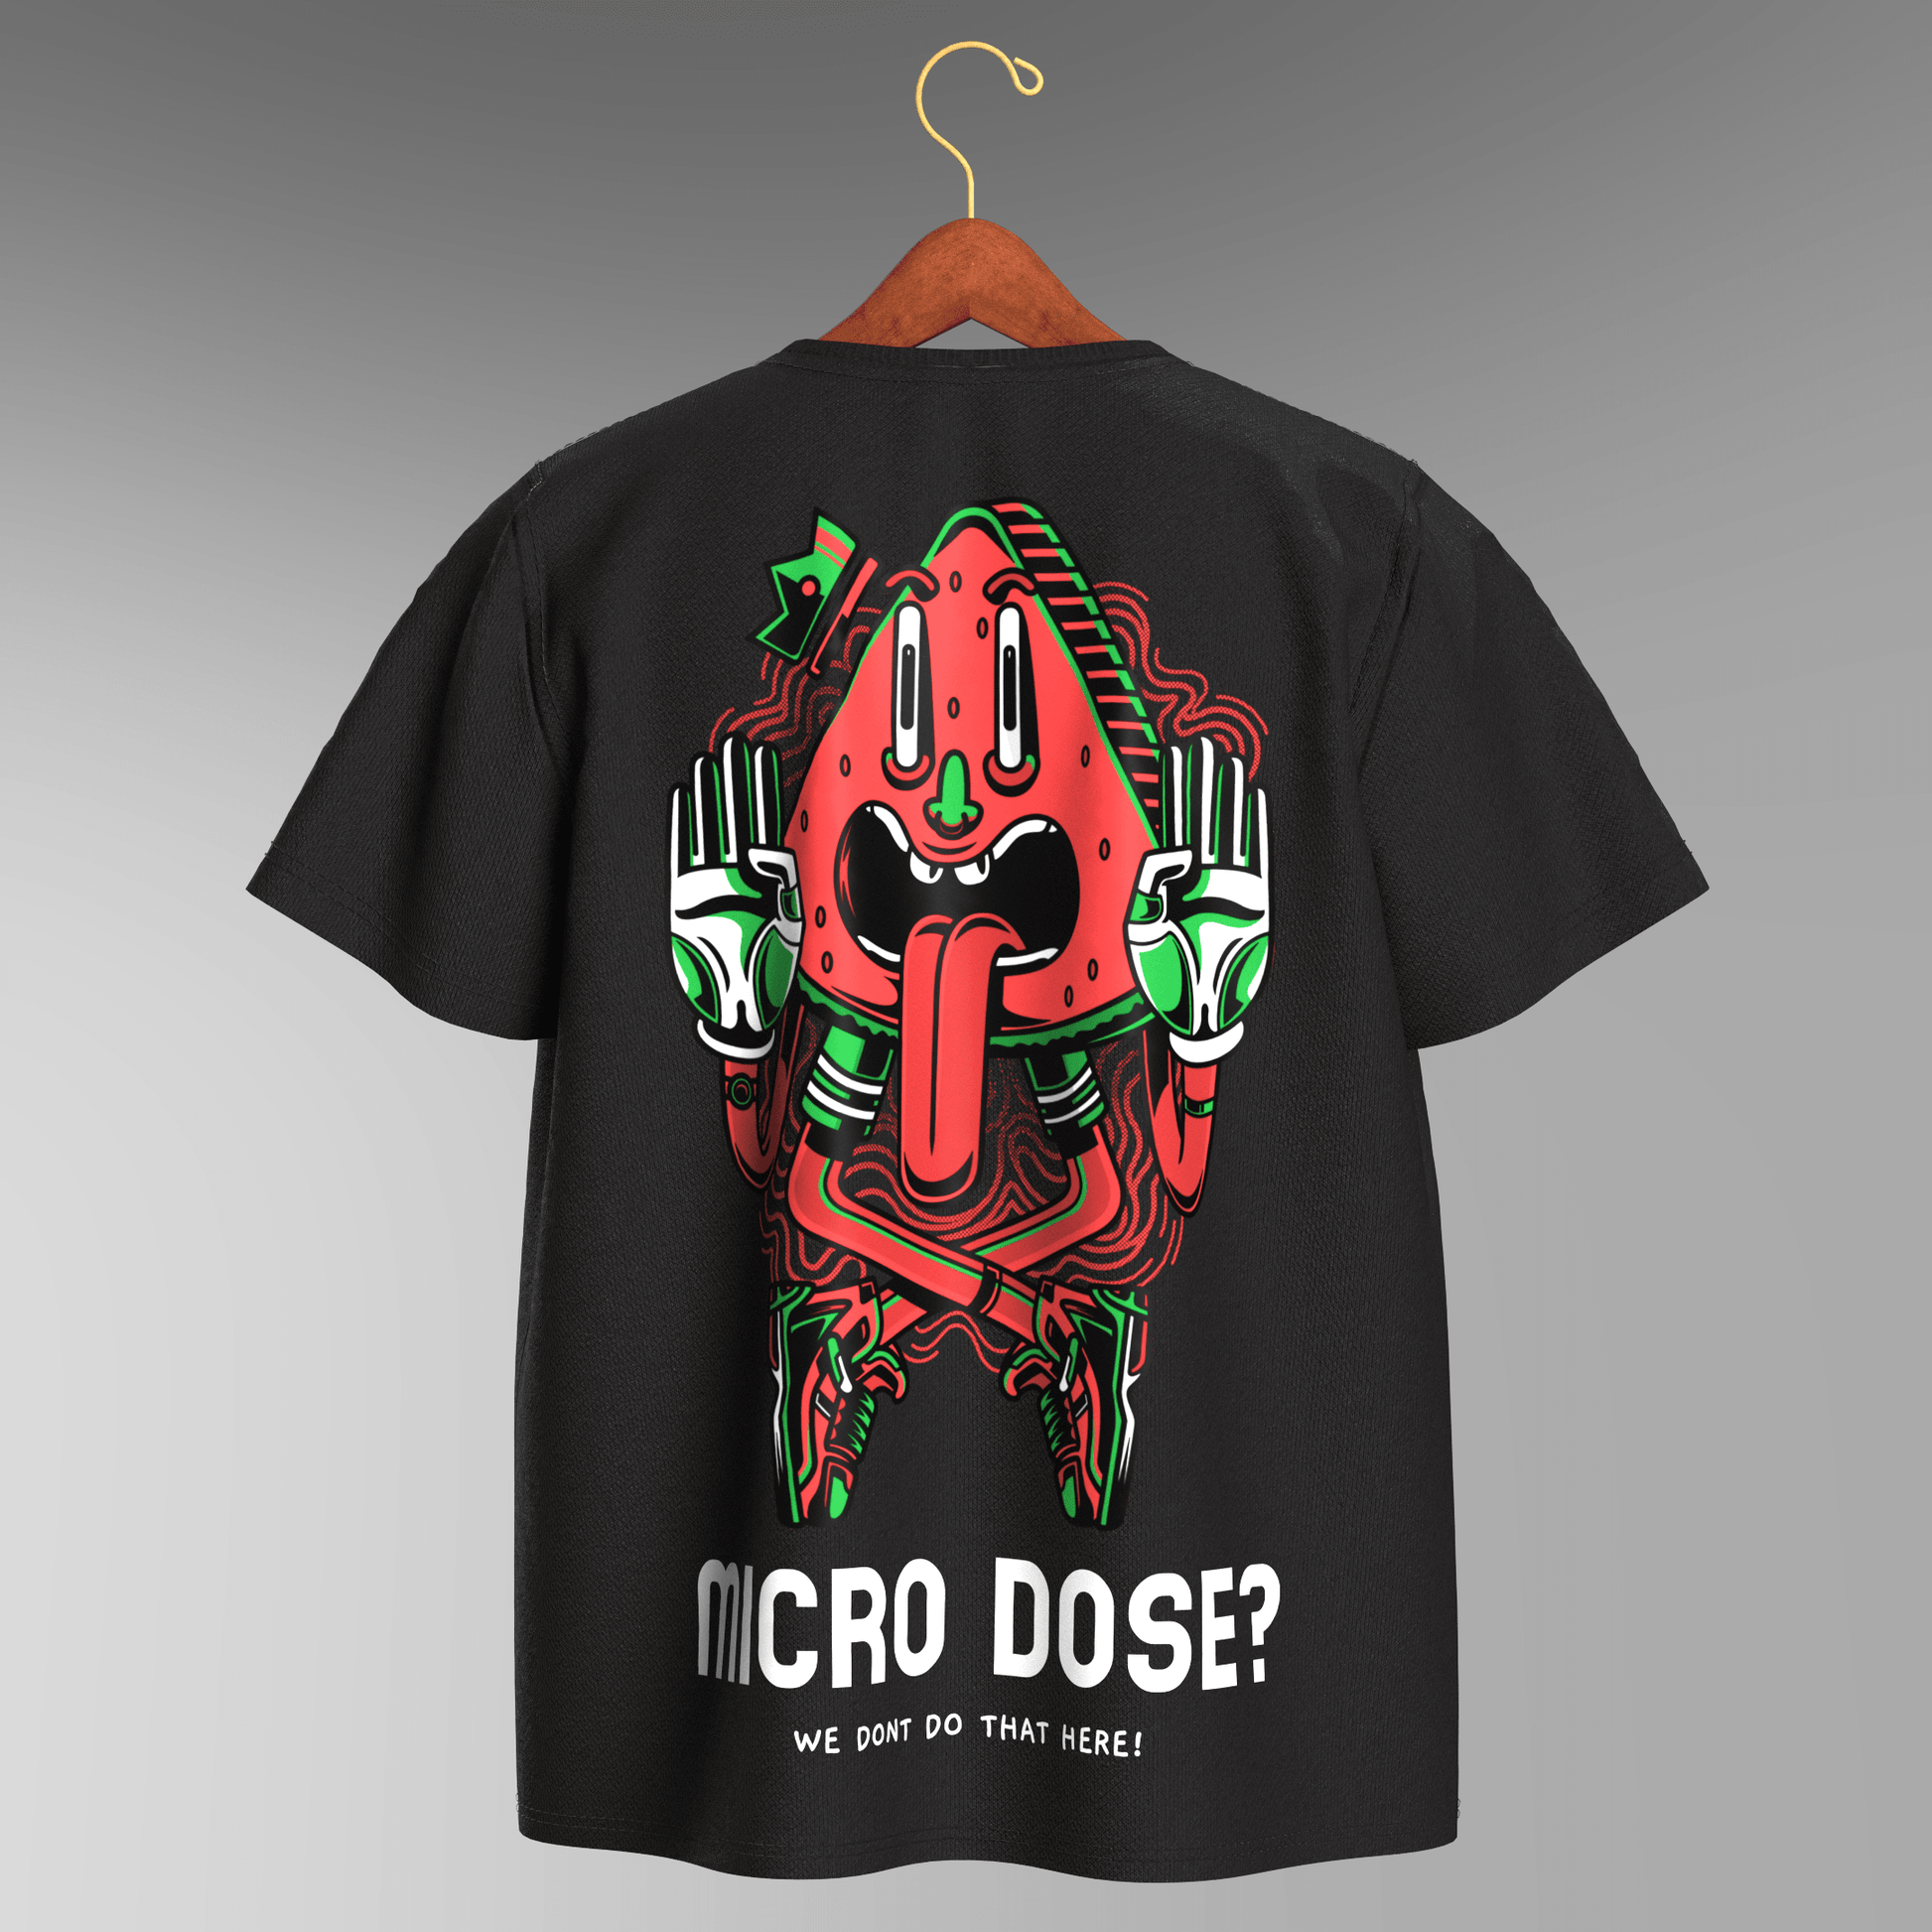 MICRO DOSE OVERSIZE T-SHIRT - FROM THE STREETS